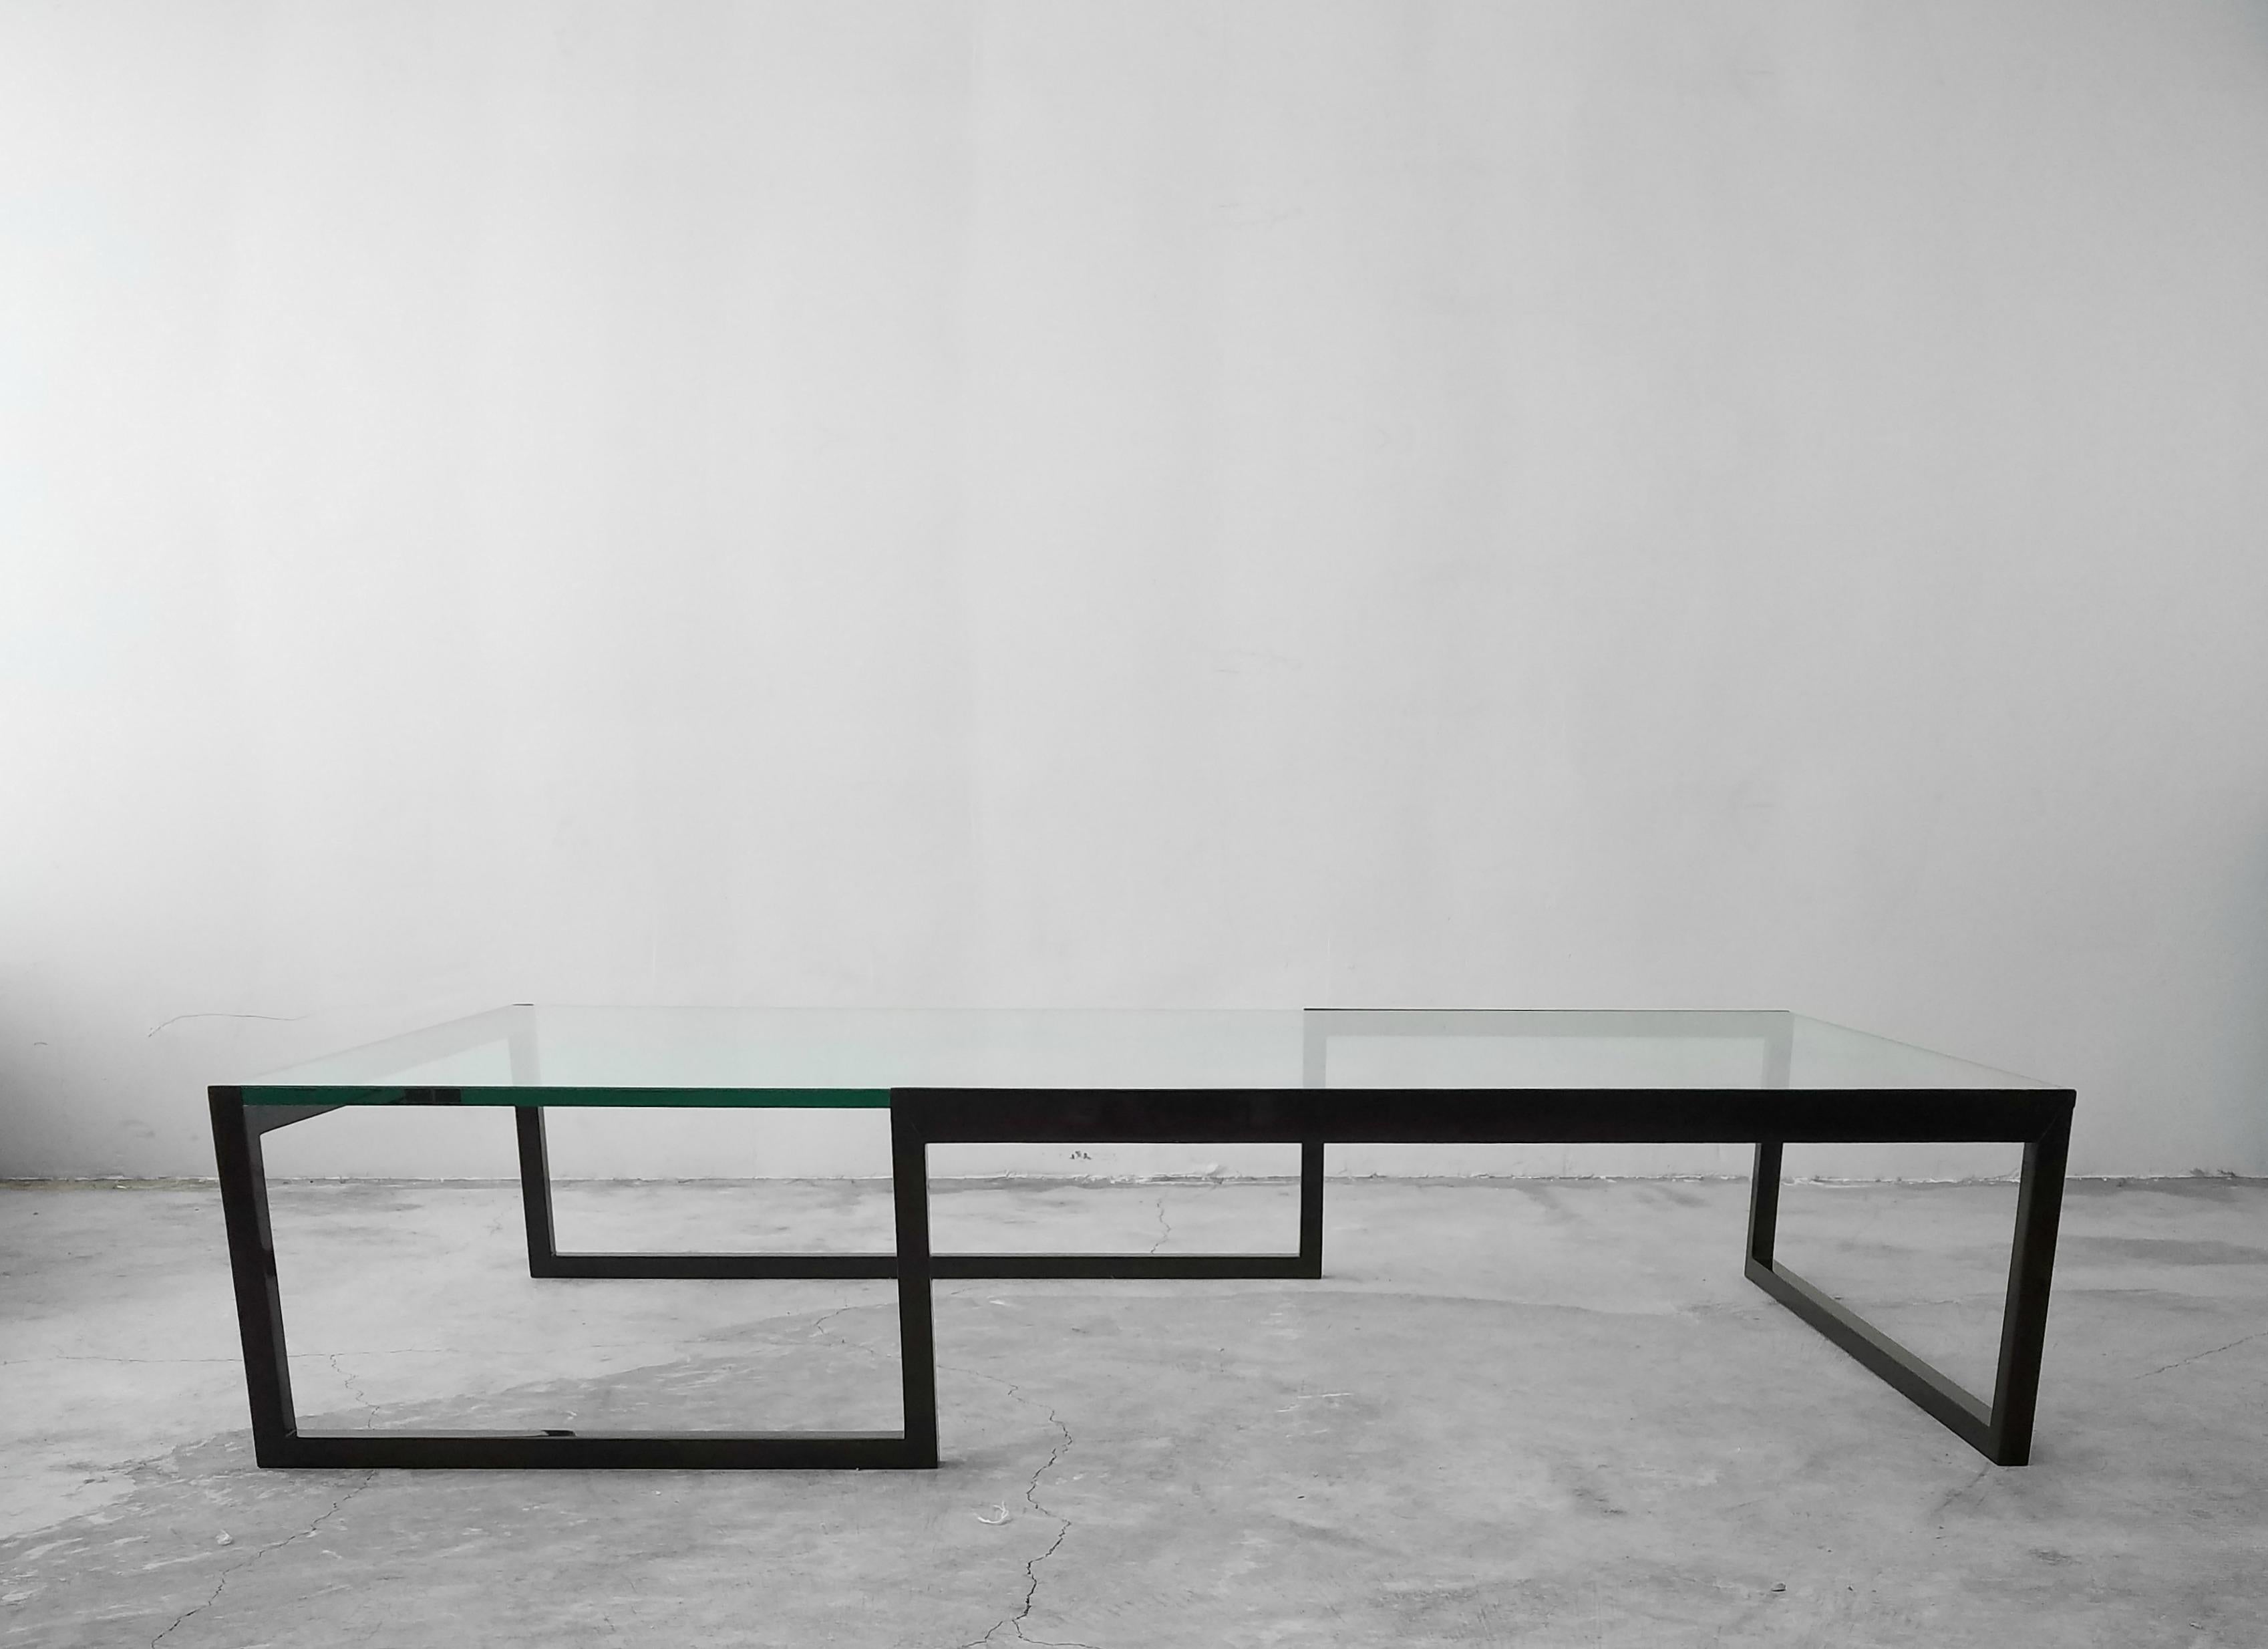 This is an extremely large and versatile metal and glass coffee table. The table frame is a unique shape and very minimal and modern in appearance. The frame has been lacquered, and under the lacquer is a wood grain, so it's a metal table that looks